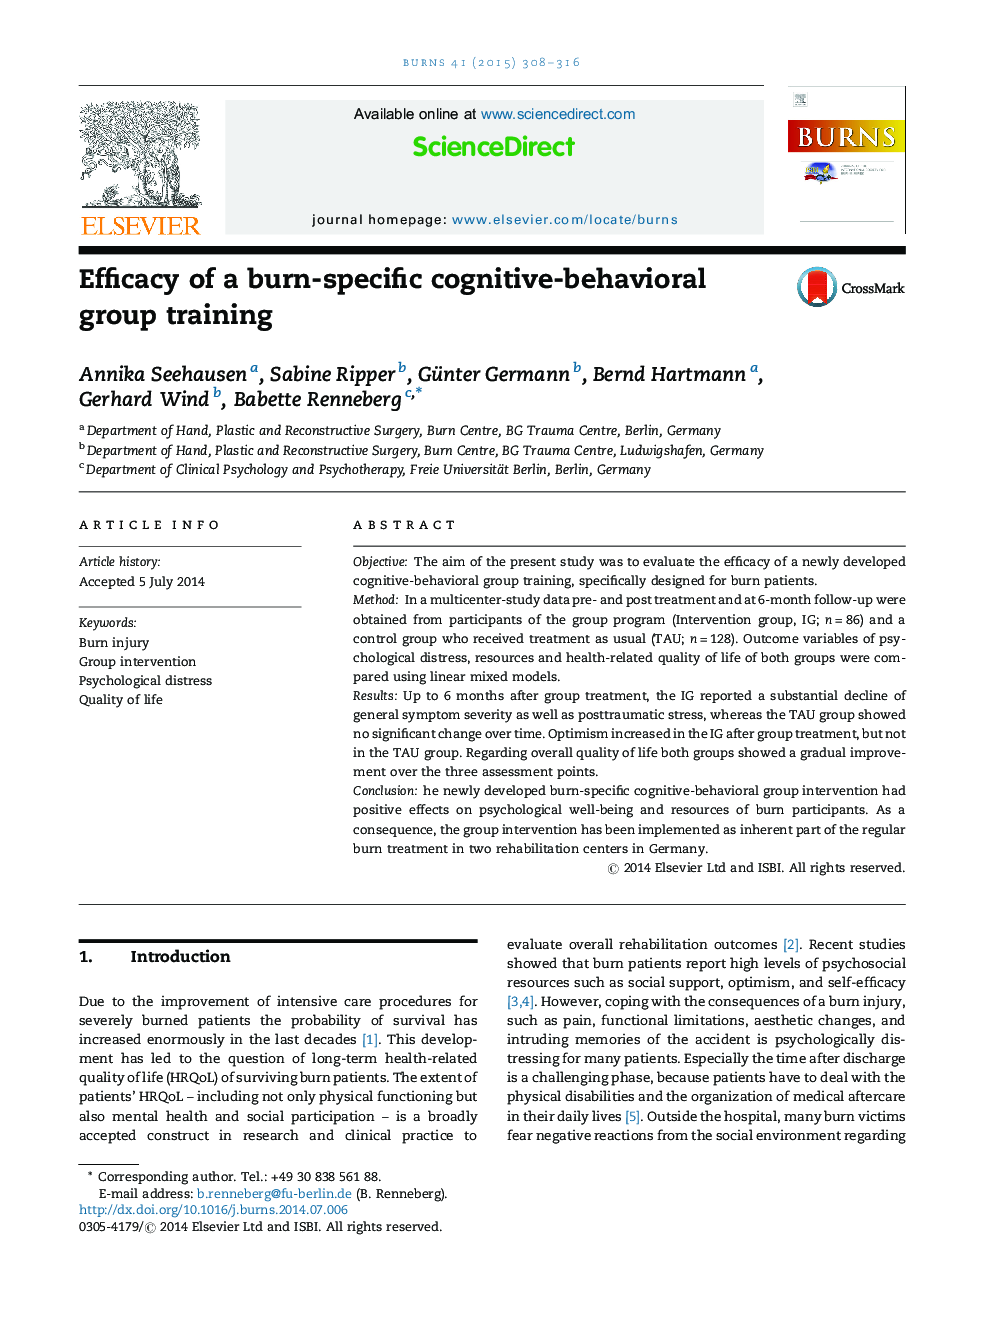 Efficacy of a burn-specific cognitive-behavioral group training